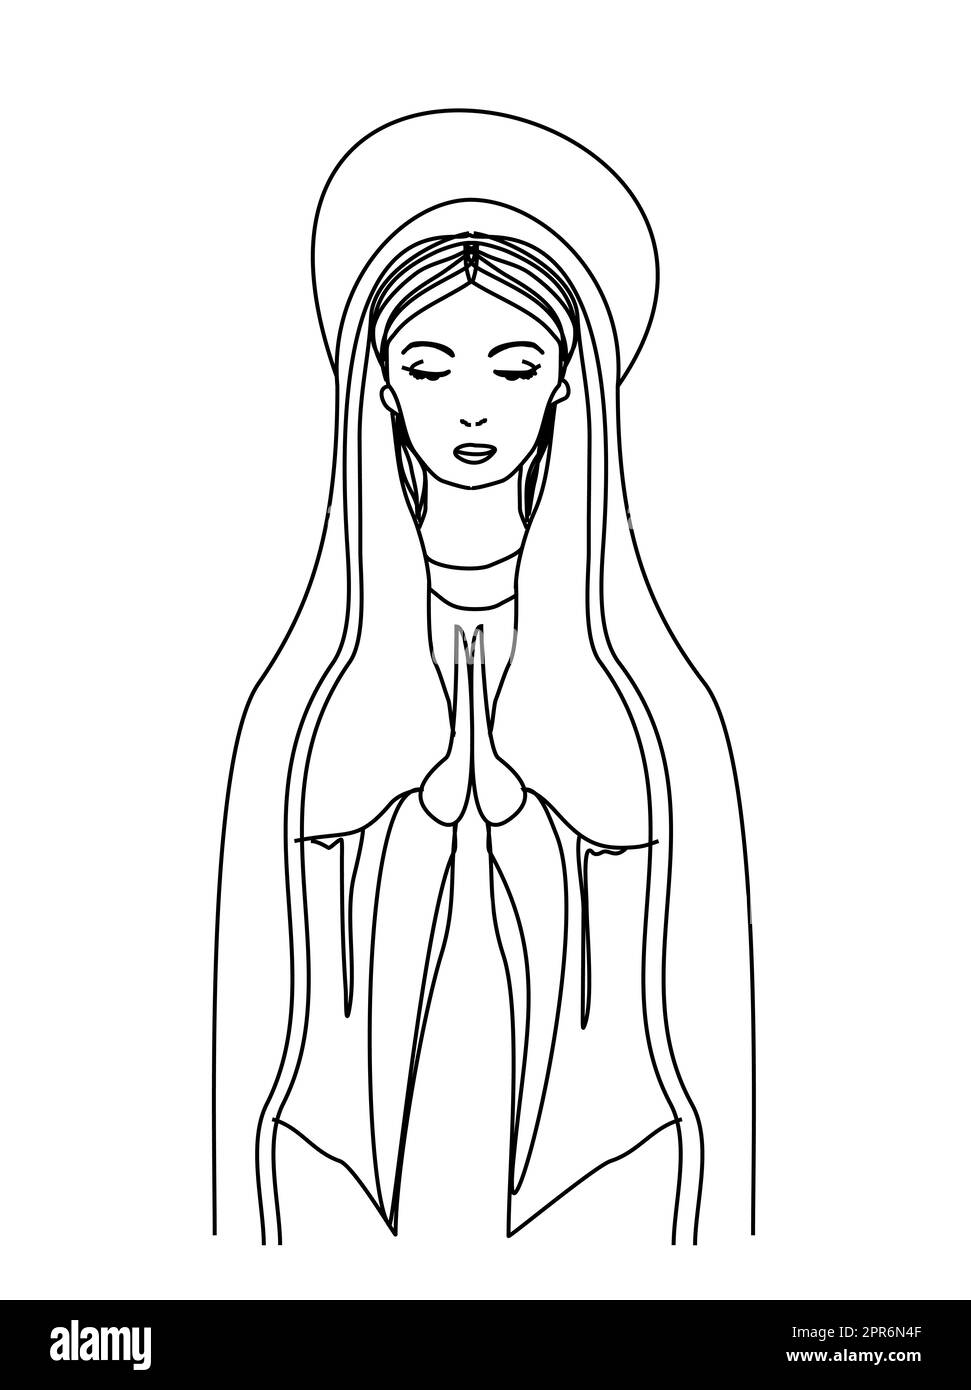 Blessed Virgin Mary in black and white contour drawing Stock Photo - Alamy